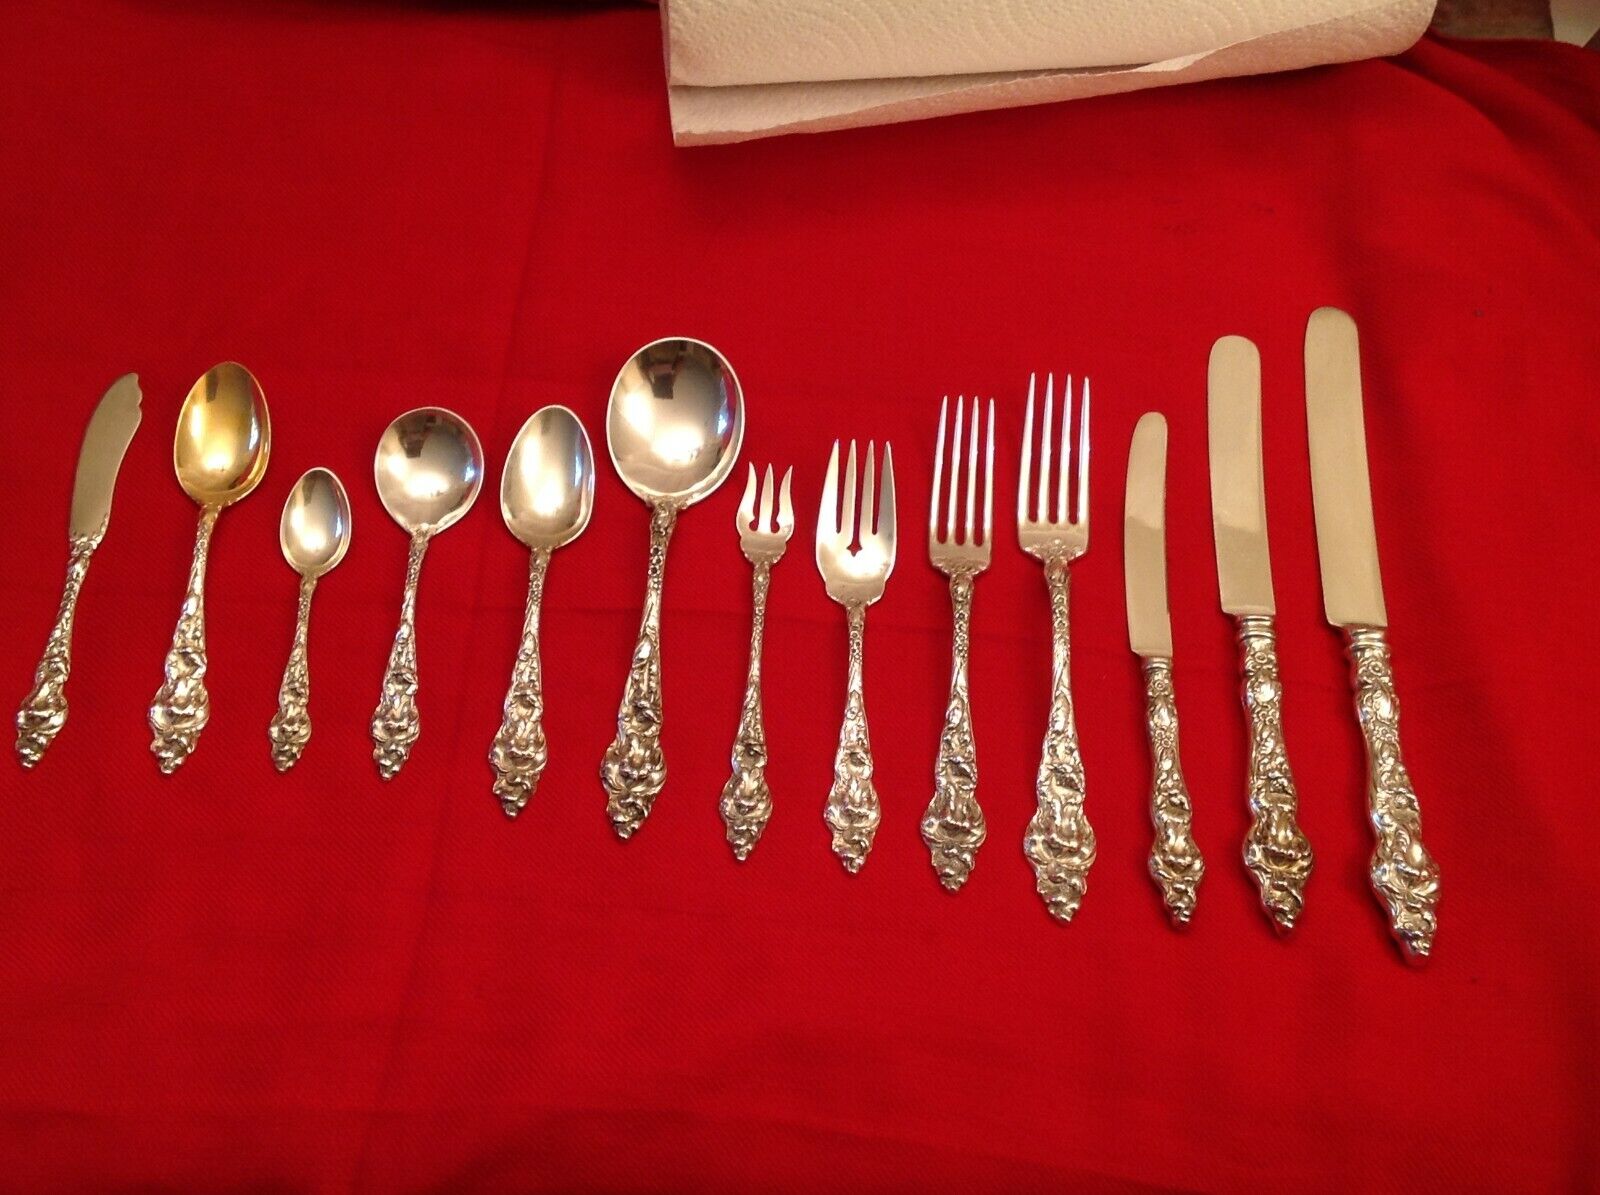 160 PIECE REED & BARTON LES SIX FLEURS STERLING SET FOR 12 OLD MARK PAT. DATE